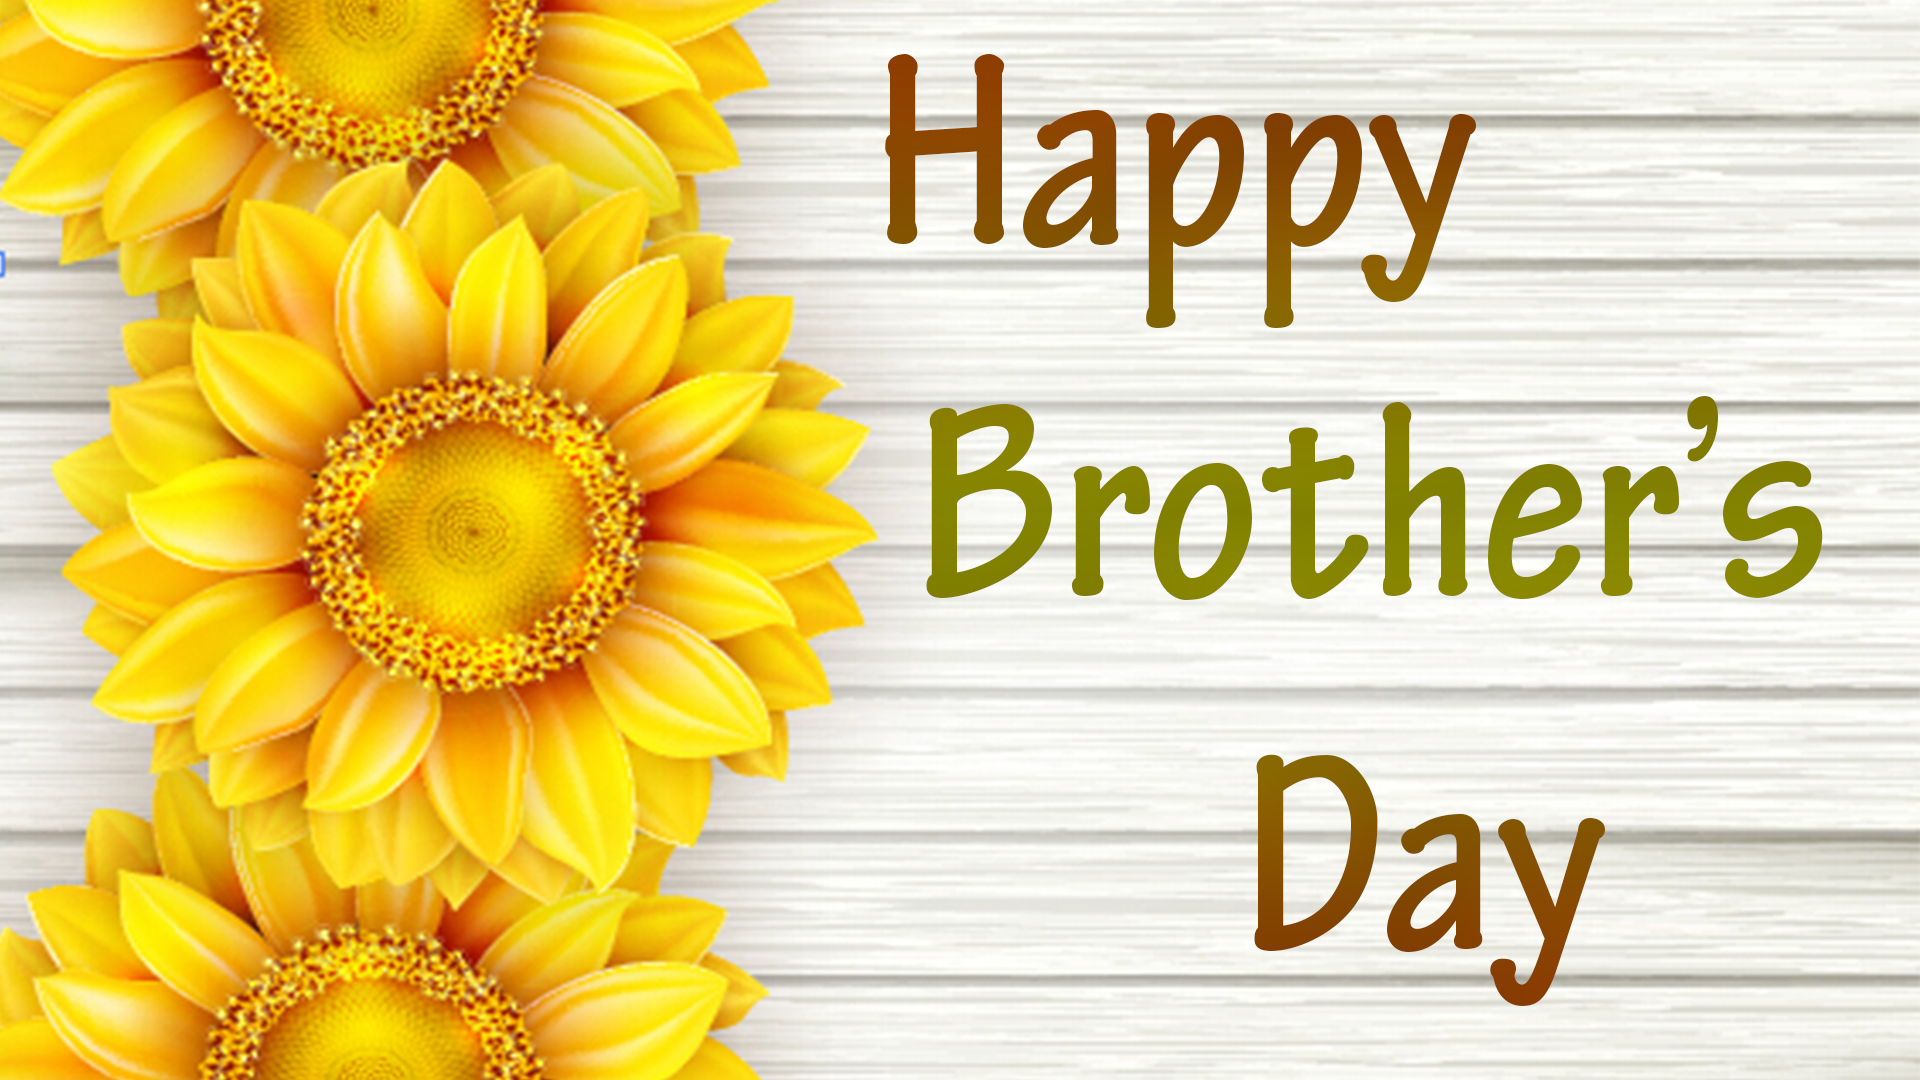 Happy Brothers Day quotes images wishes and status ideas  Tukocoke